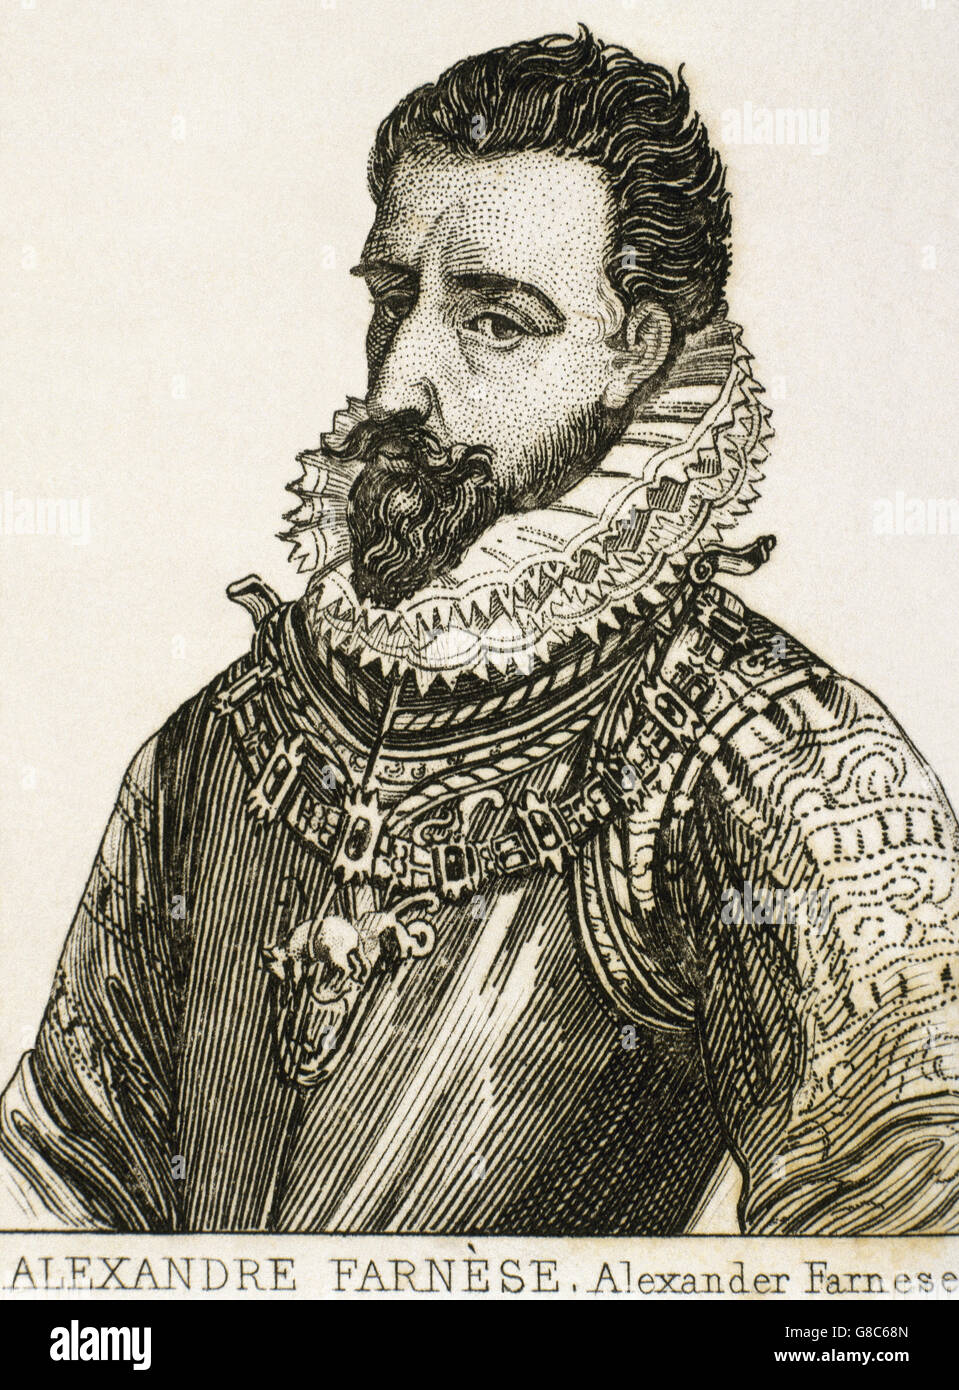 Alexander Farnese (1545-1592). Duke of Parma, Piacenza and Castro and Governor of the Spanish Nedtherlands (1578-1592). Portrait. Engraving. Stock Photo